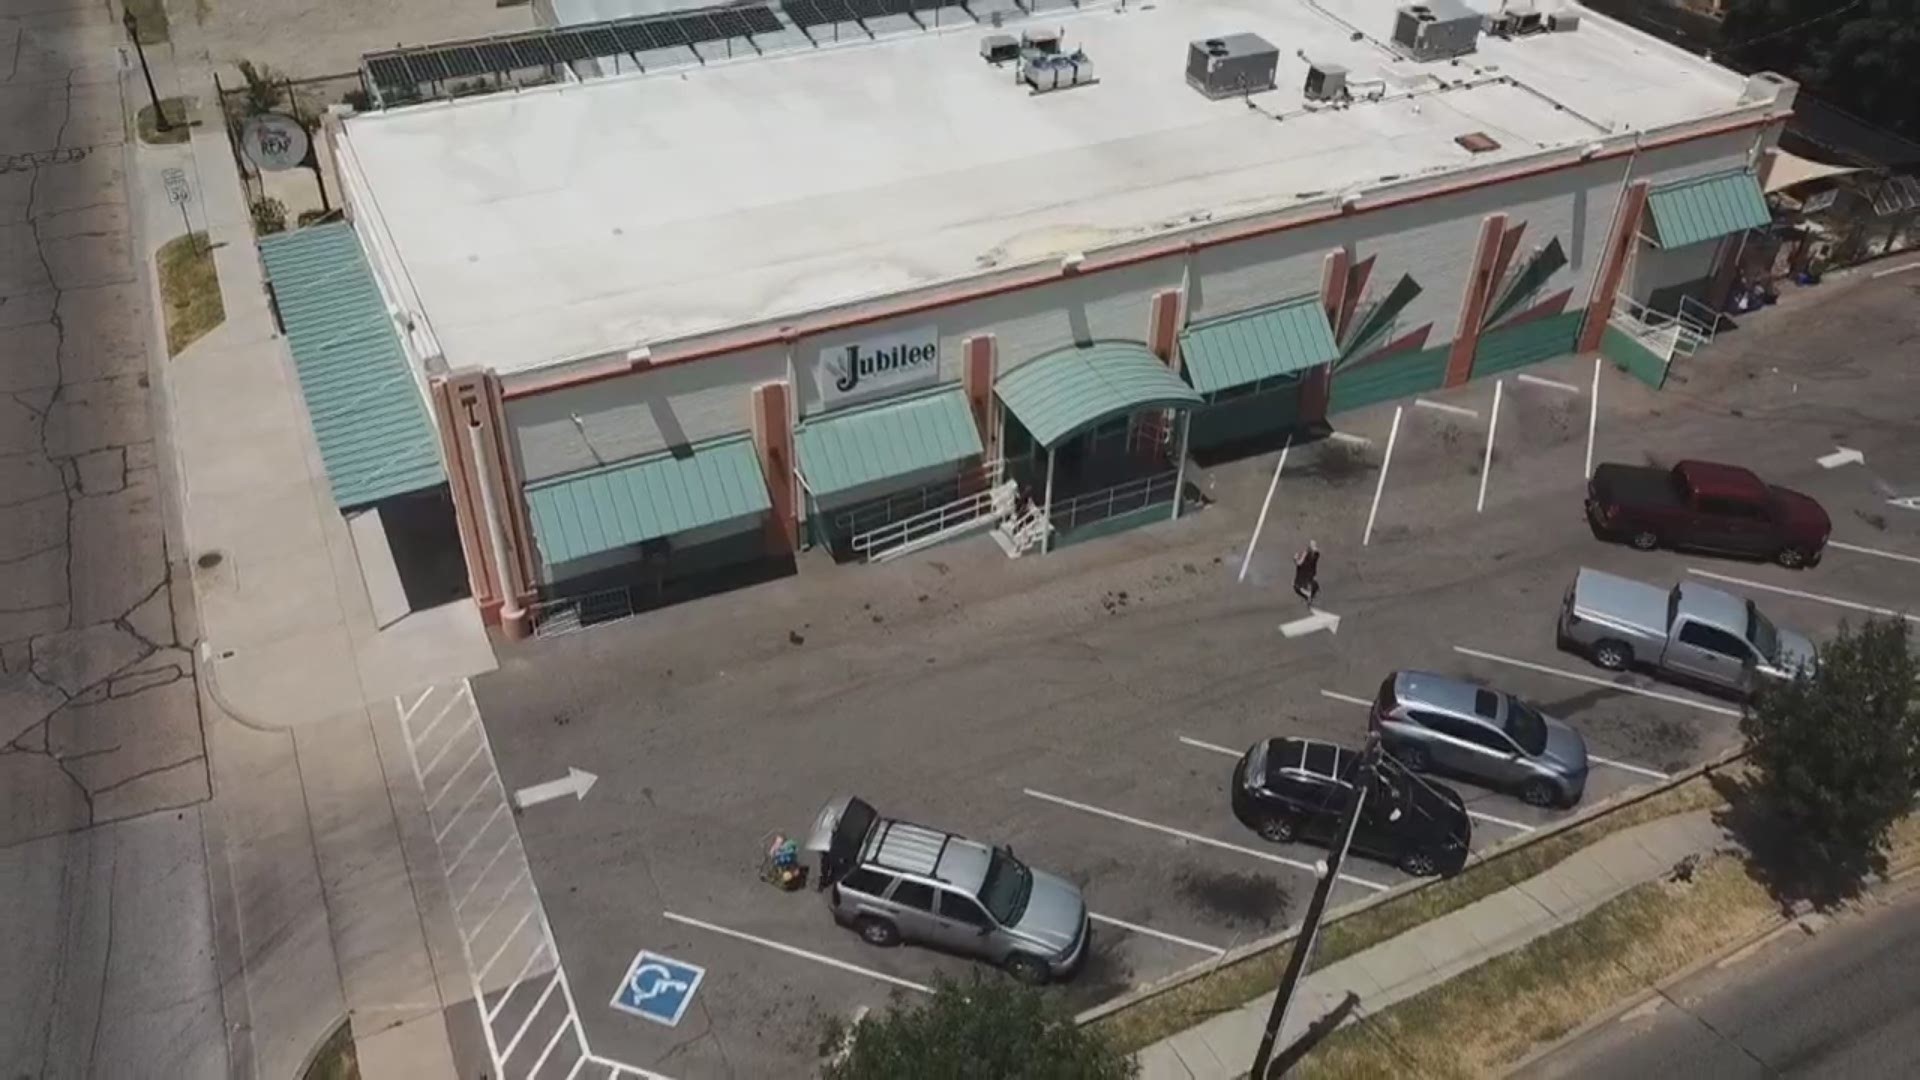 With success stories emerging from former "food deserts," a community in Oak Cliff is hoping its fresh food oasis is finally just around the corner. A few weeks ago, WFAA reported on how a little corner grocery store called Jubilee opened in an impoverished area near downtown Waco brought big change for residents.